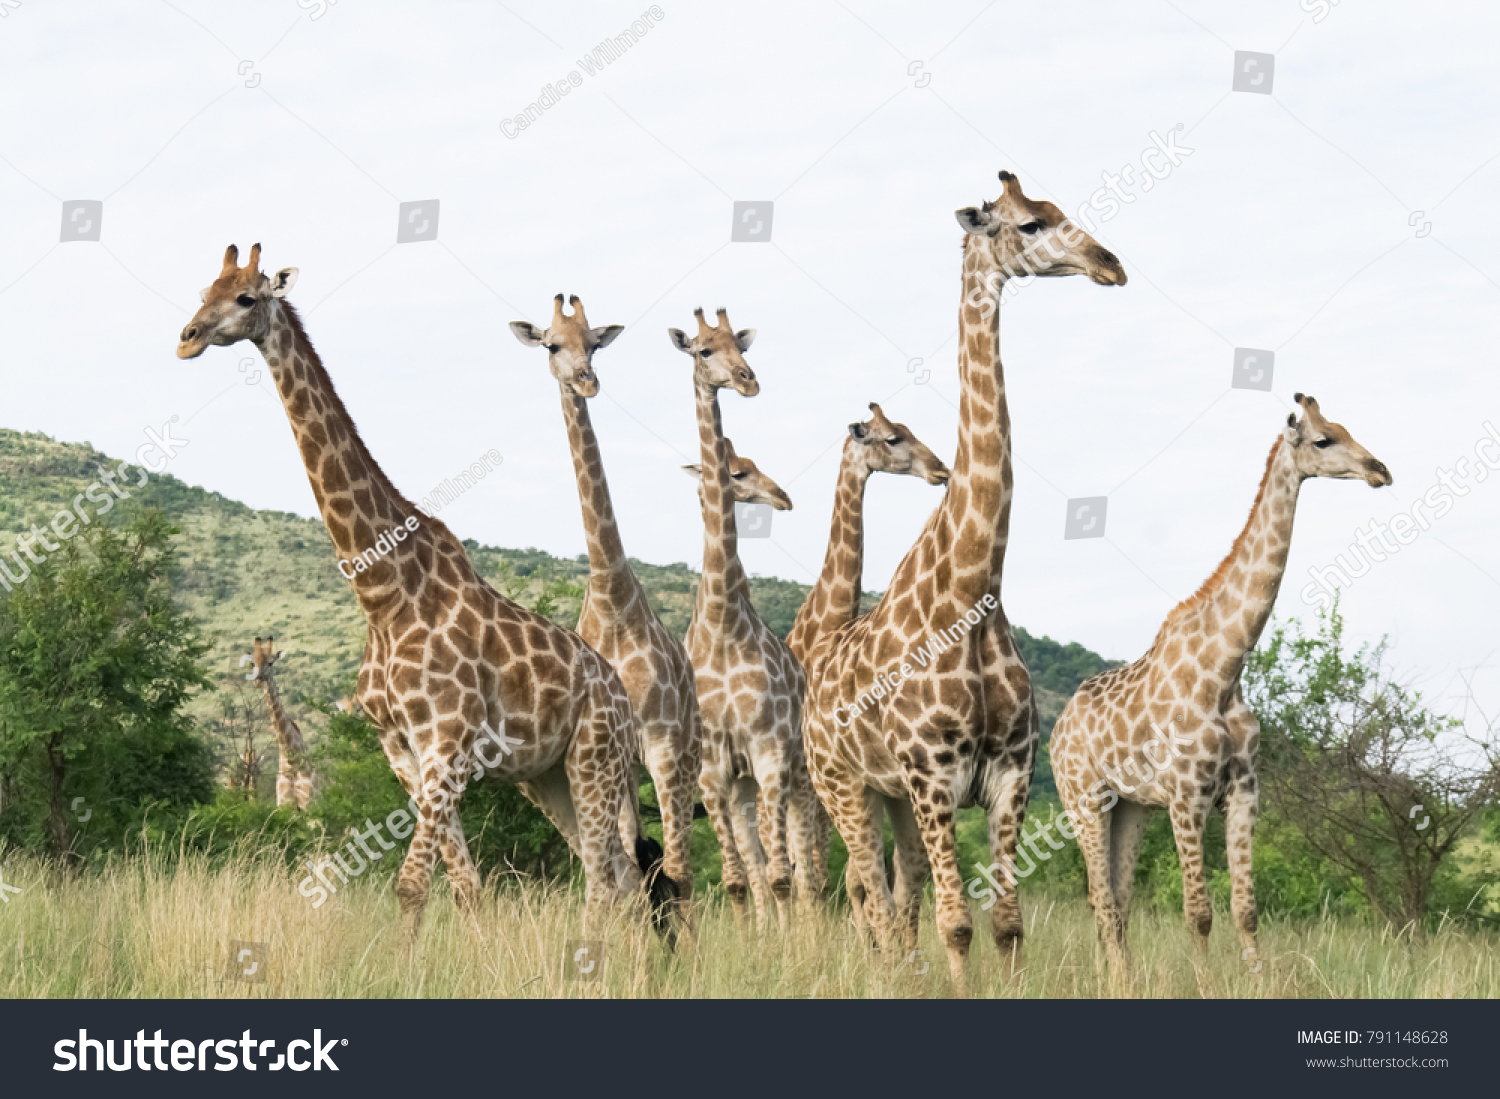 South African giraffe (Giraffa, G. camelopardalis) Family of giraffes standing on a hill in the thick lowveld, Pilanesberg National Park, Kalahari and lowveld, South Africa #791148628